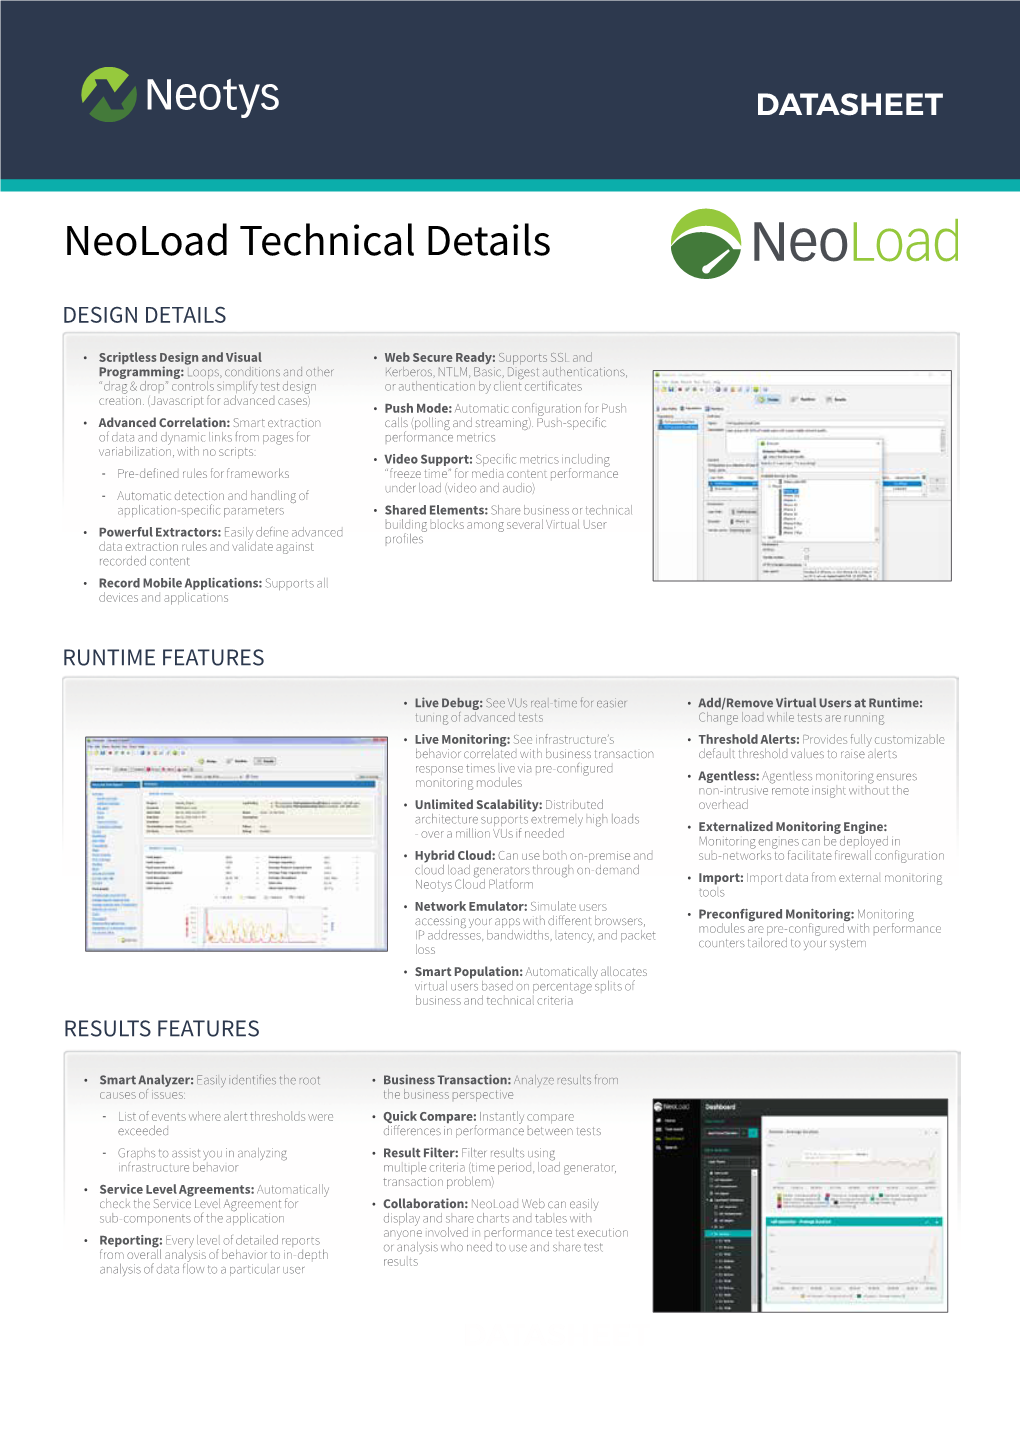 Neoload Technical Details